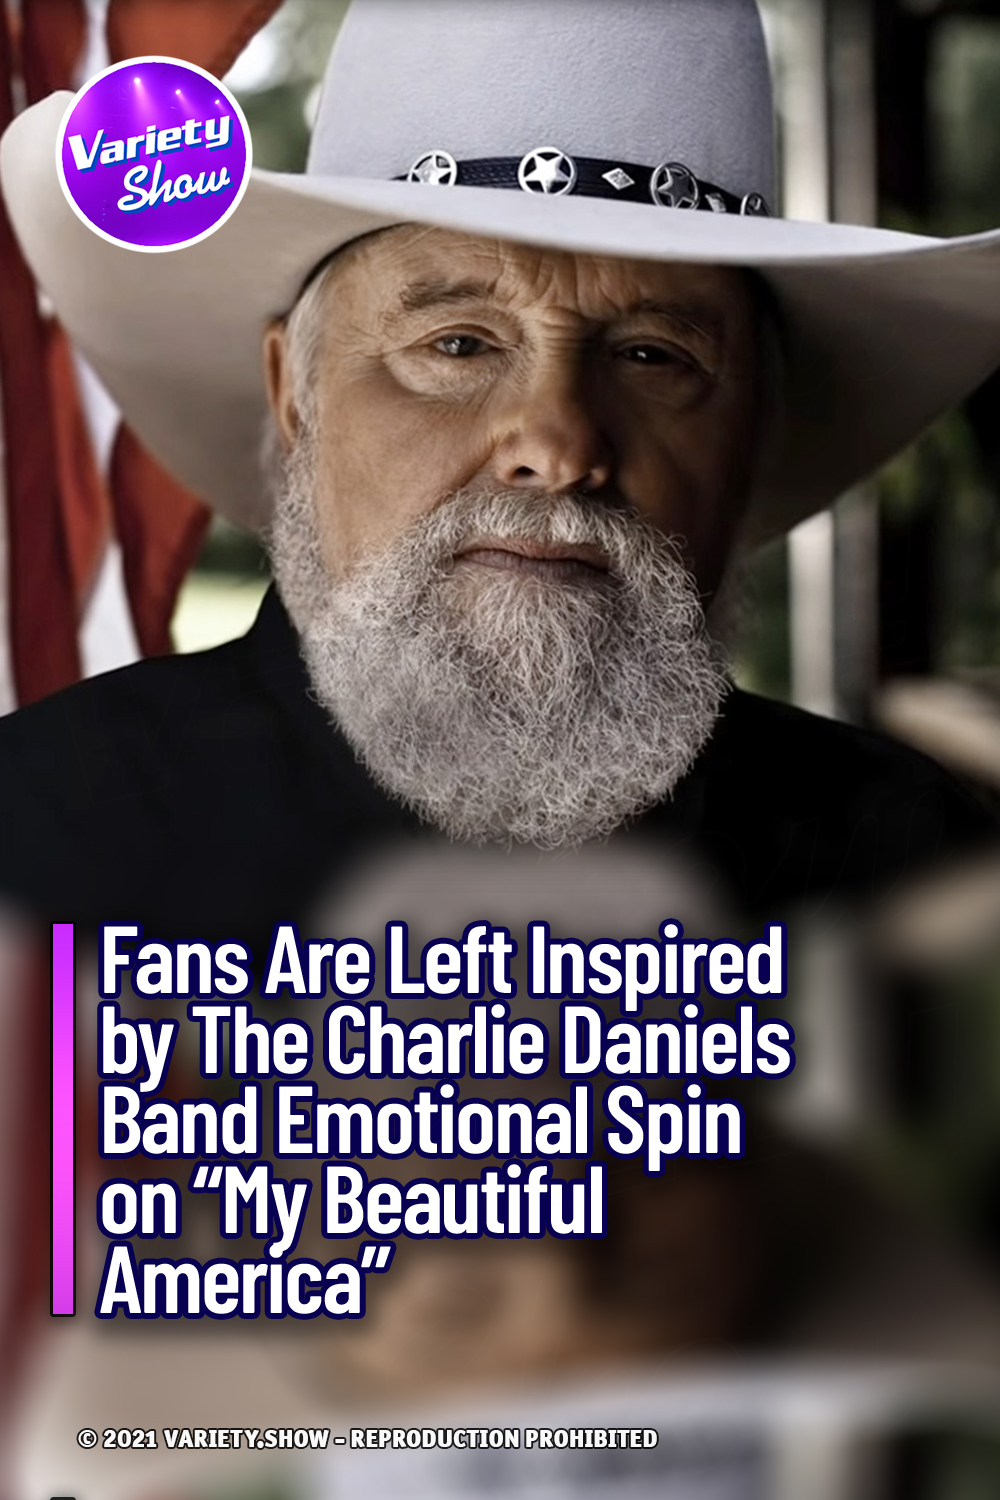 Fans Are Left Inspired by The Charlie Daniels Band Emotional Spin on “My Beautiful America”